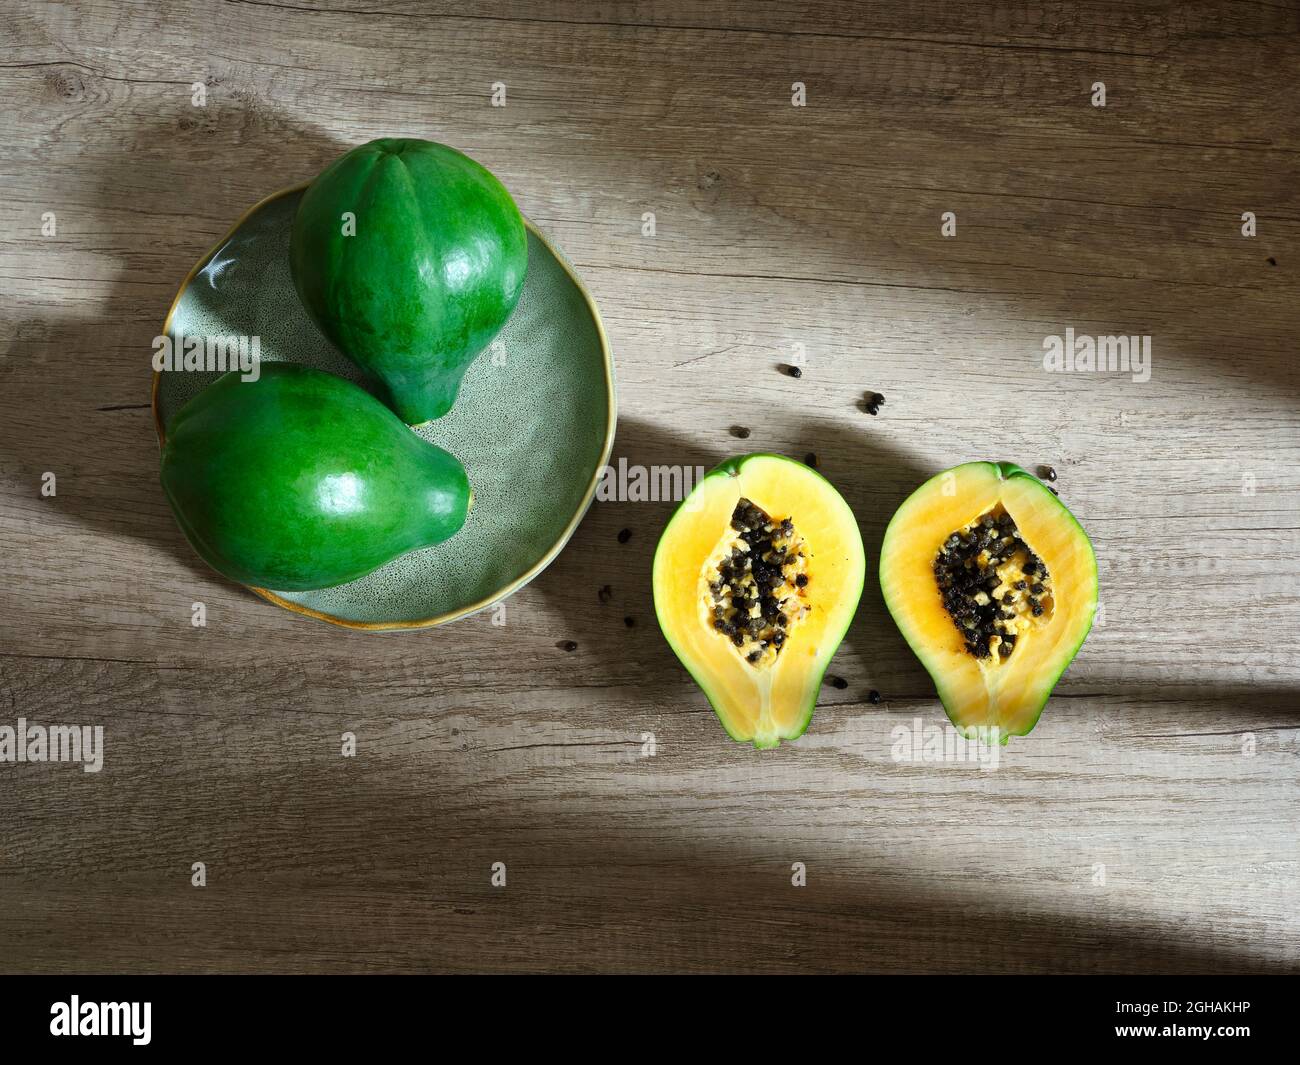 two whole and two halves green papayas on wooden surface Stock Photo